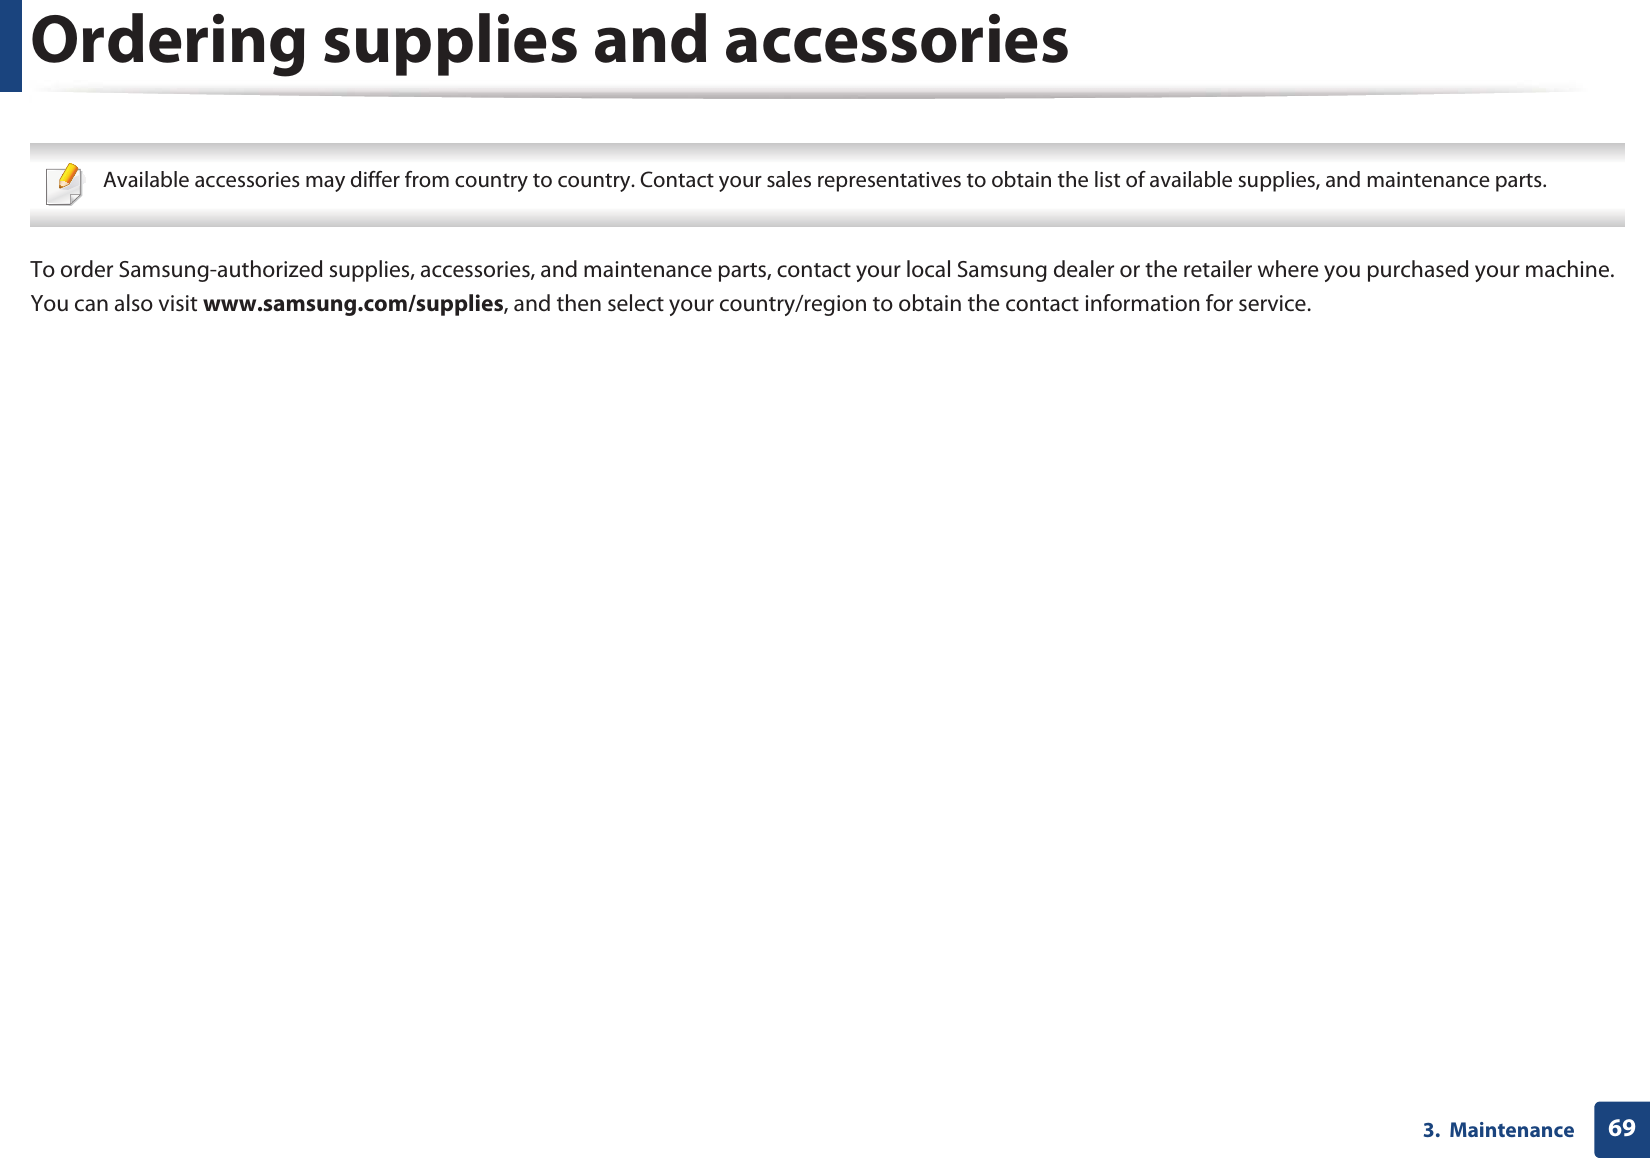 693.  MaintenanceOrdering supplies and accessories Available accessories may differ from country to country. Contact your sales representatives to obtain the list of available supplies, and maintenance parts. To order Samsung-authorized supplies, accessories, and maintenance parts, contact your local Samsung dealer or the retailer where you purchased your machine. You can also visit www.samsung.com/supplies, and then select your country/region to obtain the contact information for service.